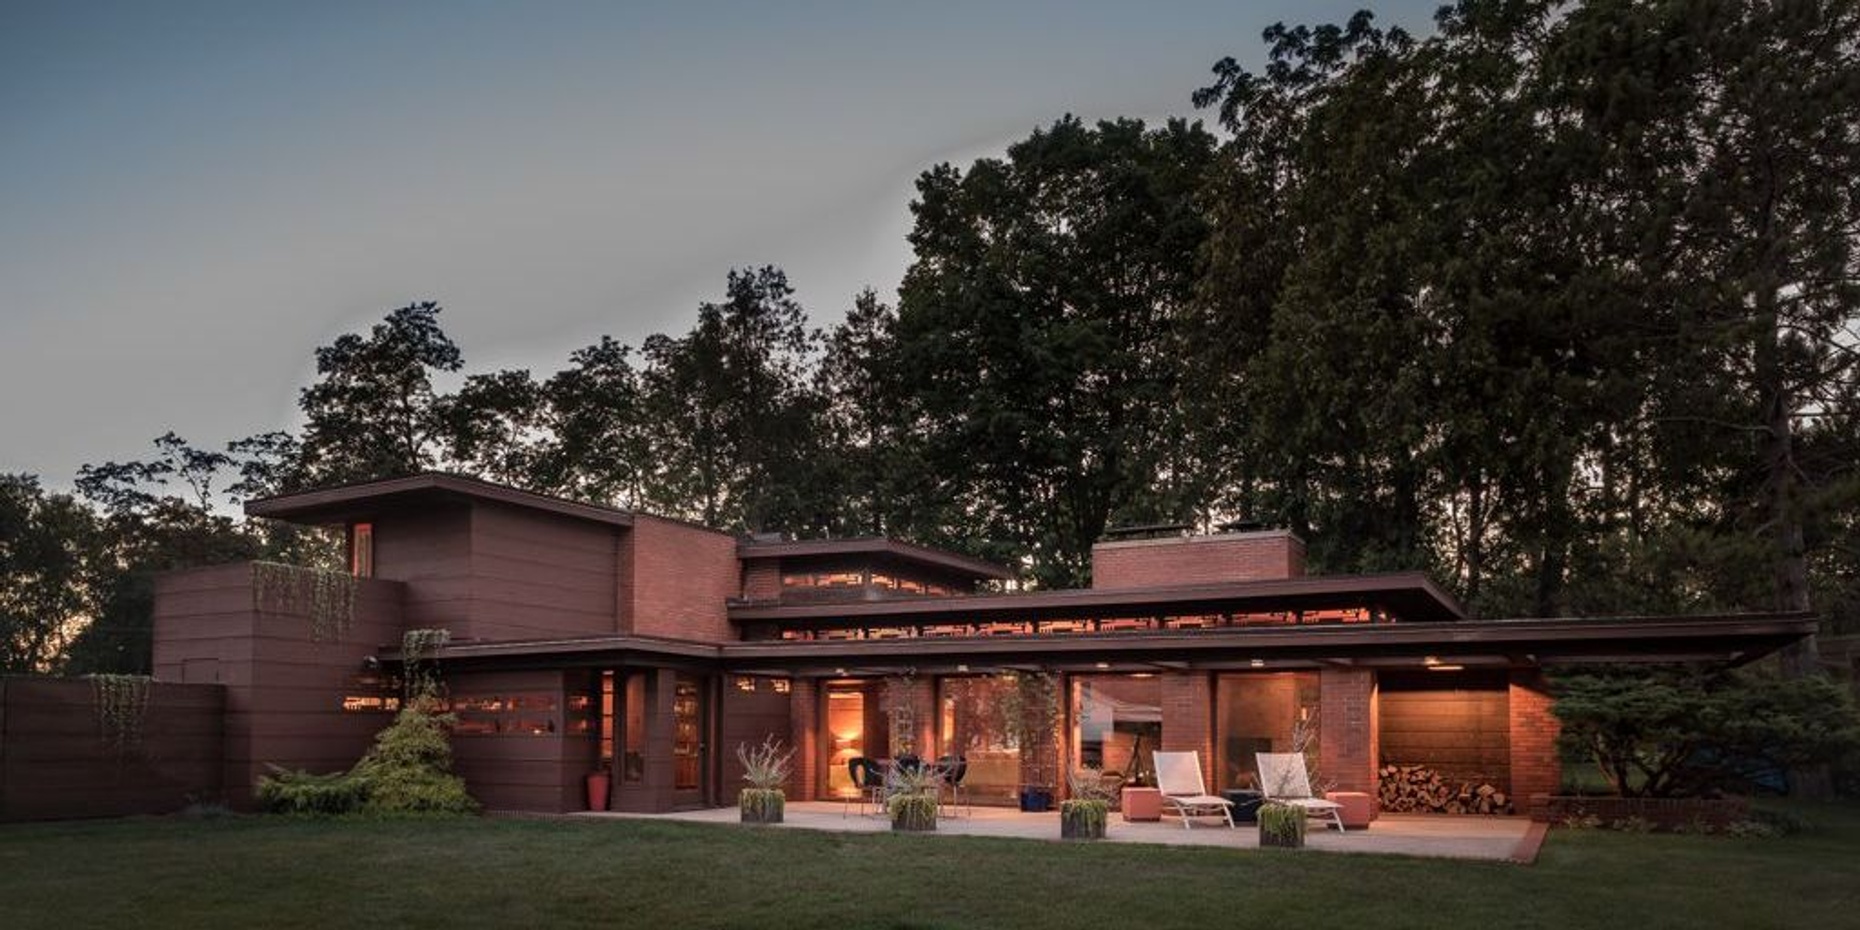 Tour Frank Lloyd Wright's "Dream House" in Two Rivers